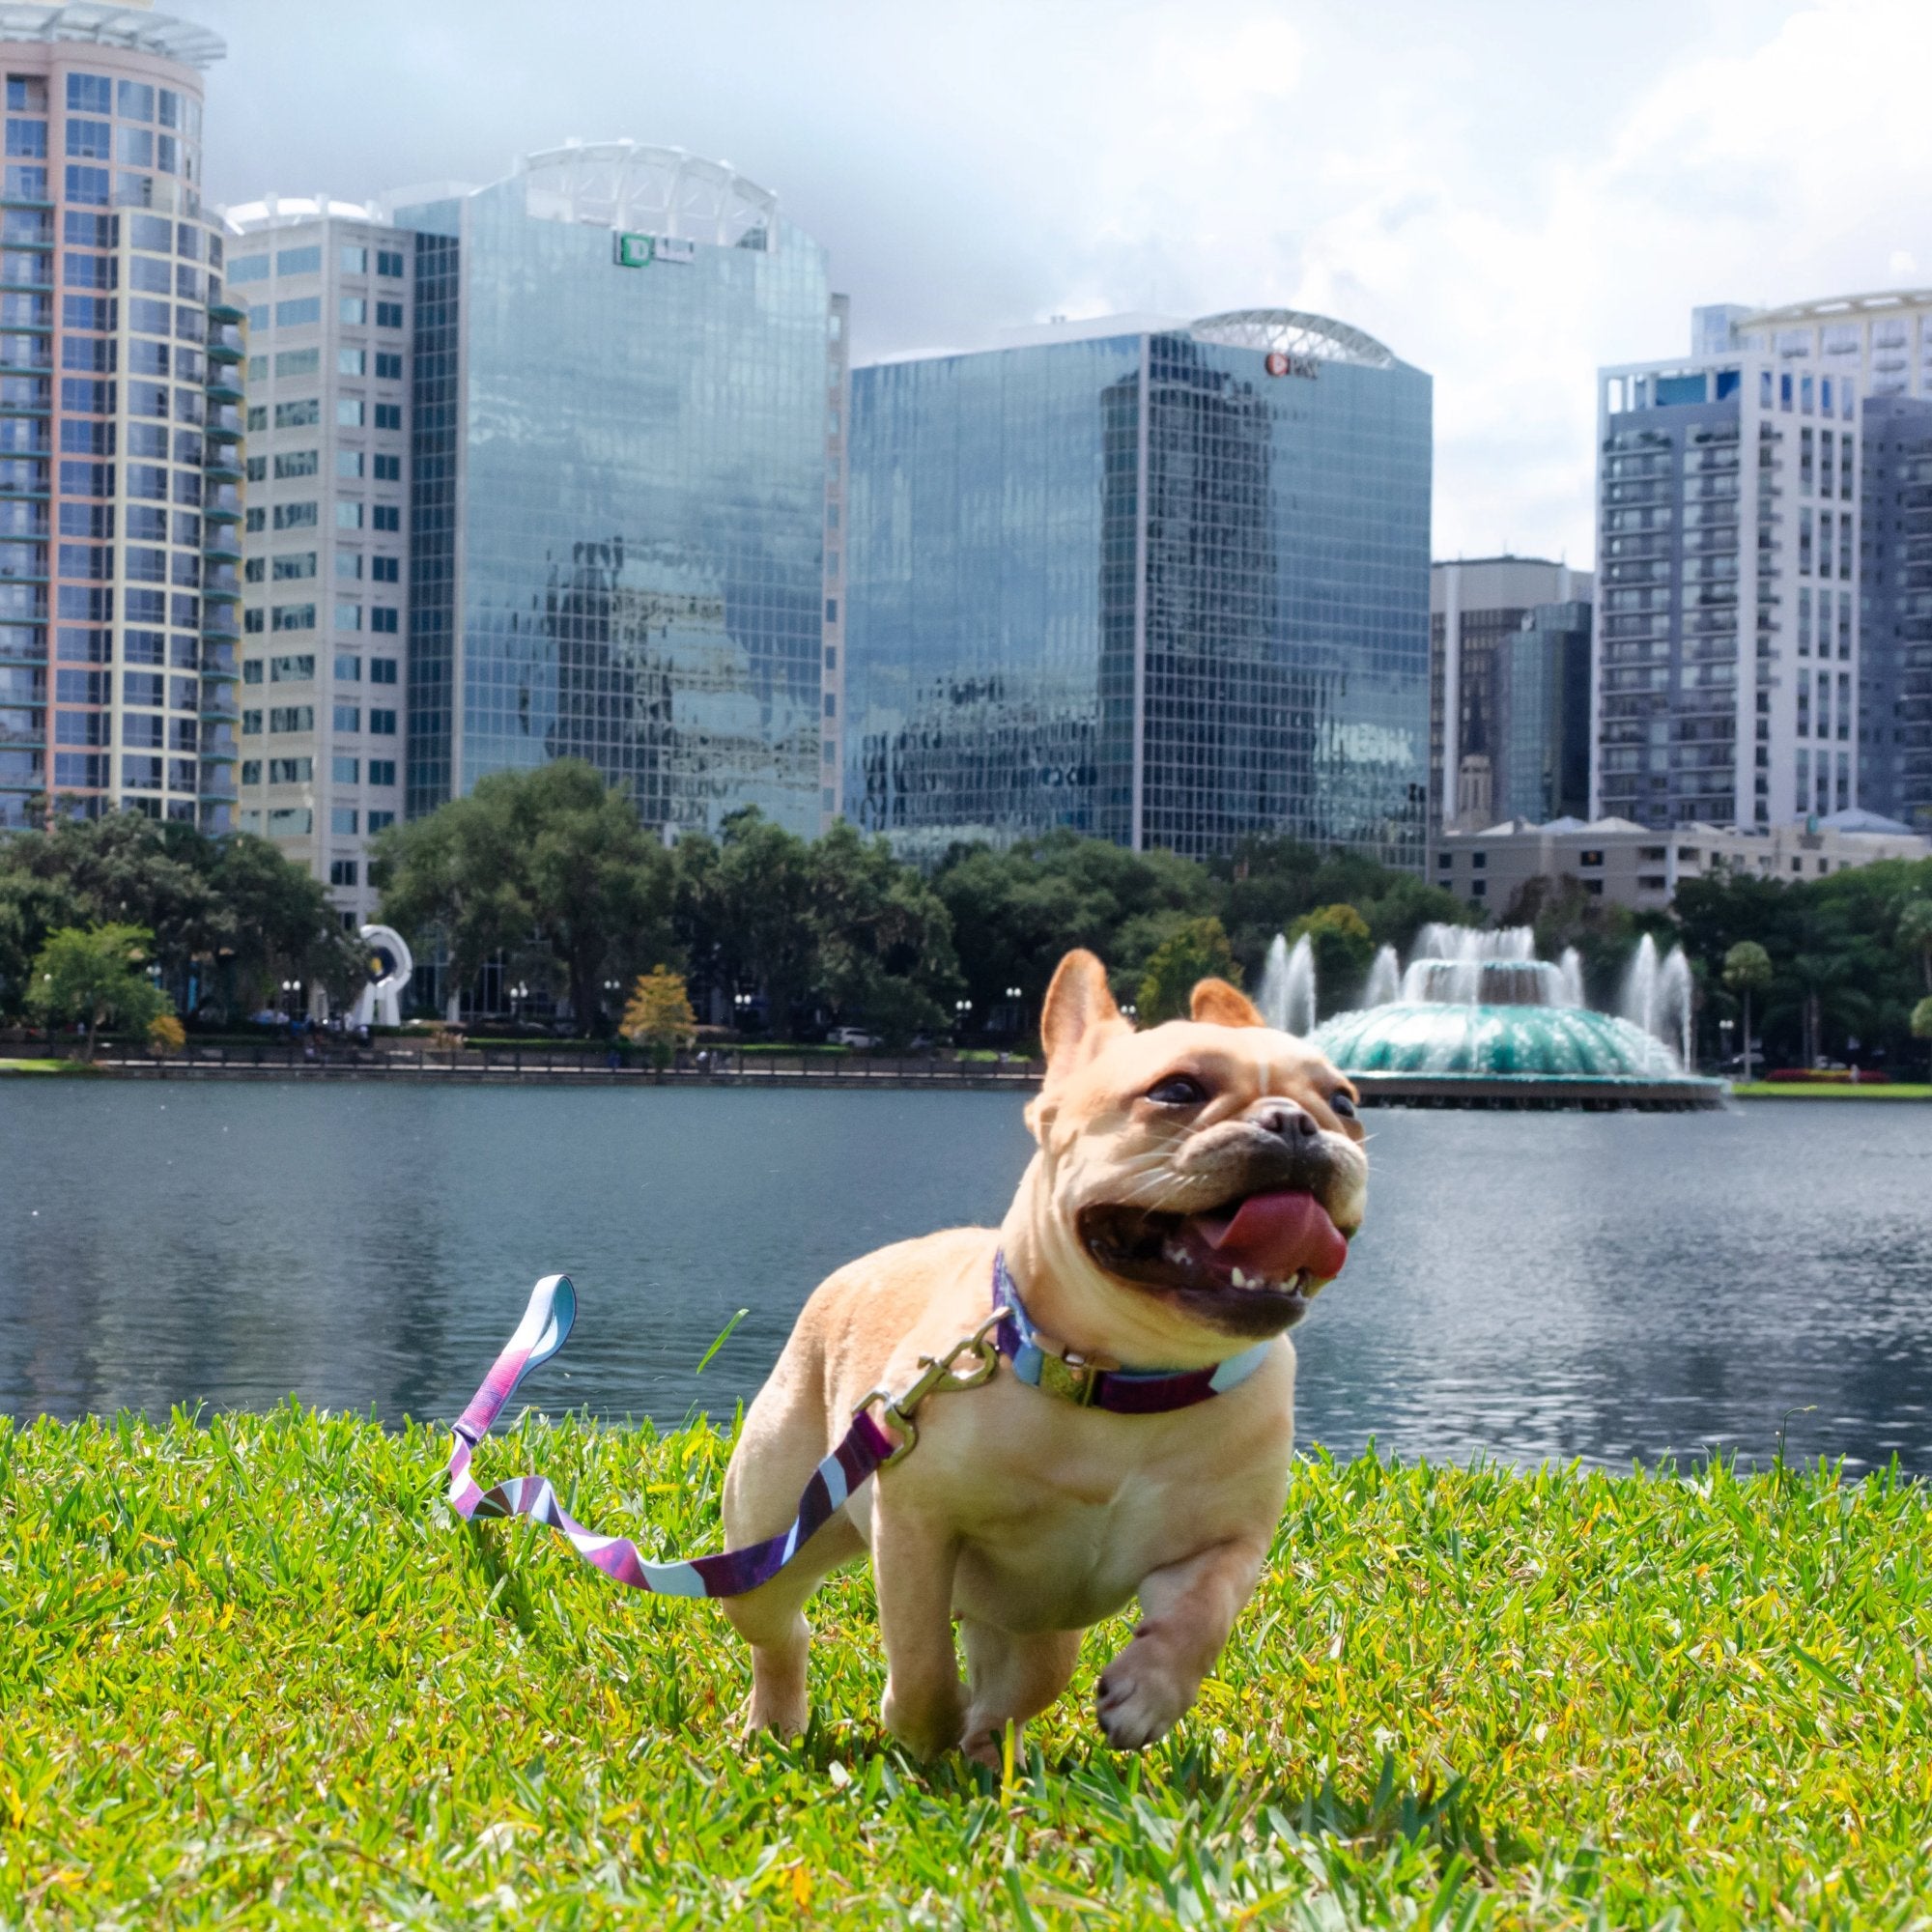 Metric Floral - Padded Dog Collar - 6 Foot Dog Leash With Padded Handle - Lake Eola - Downtown Orlando Florida - Mimosa Running in the Grass - French Bulldog